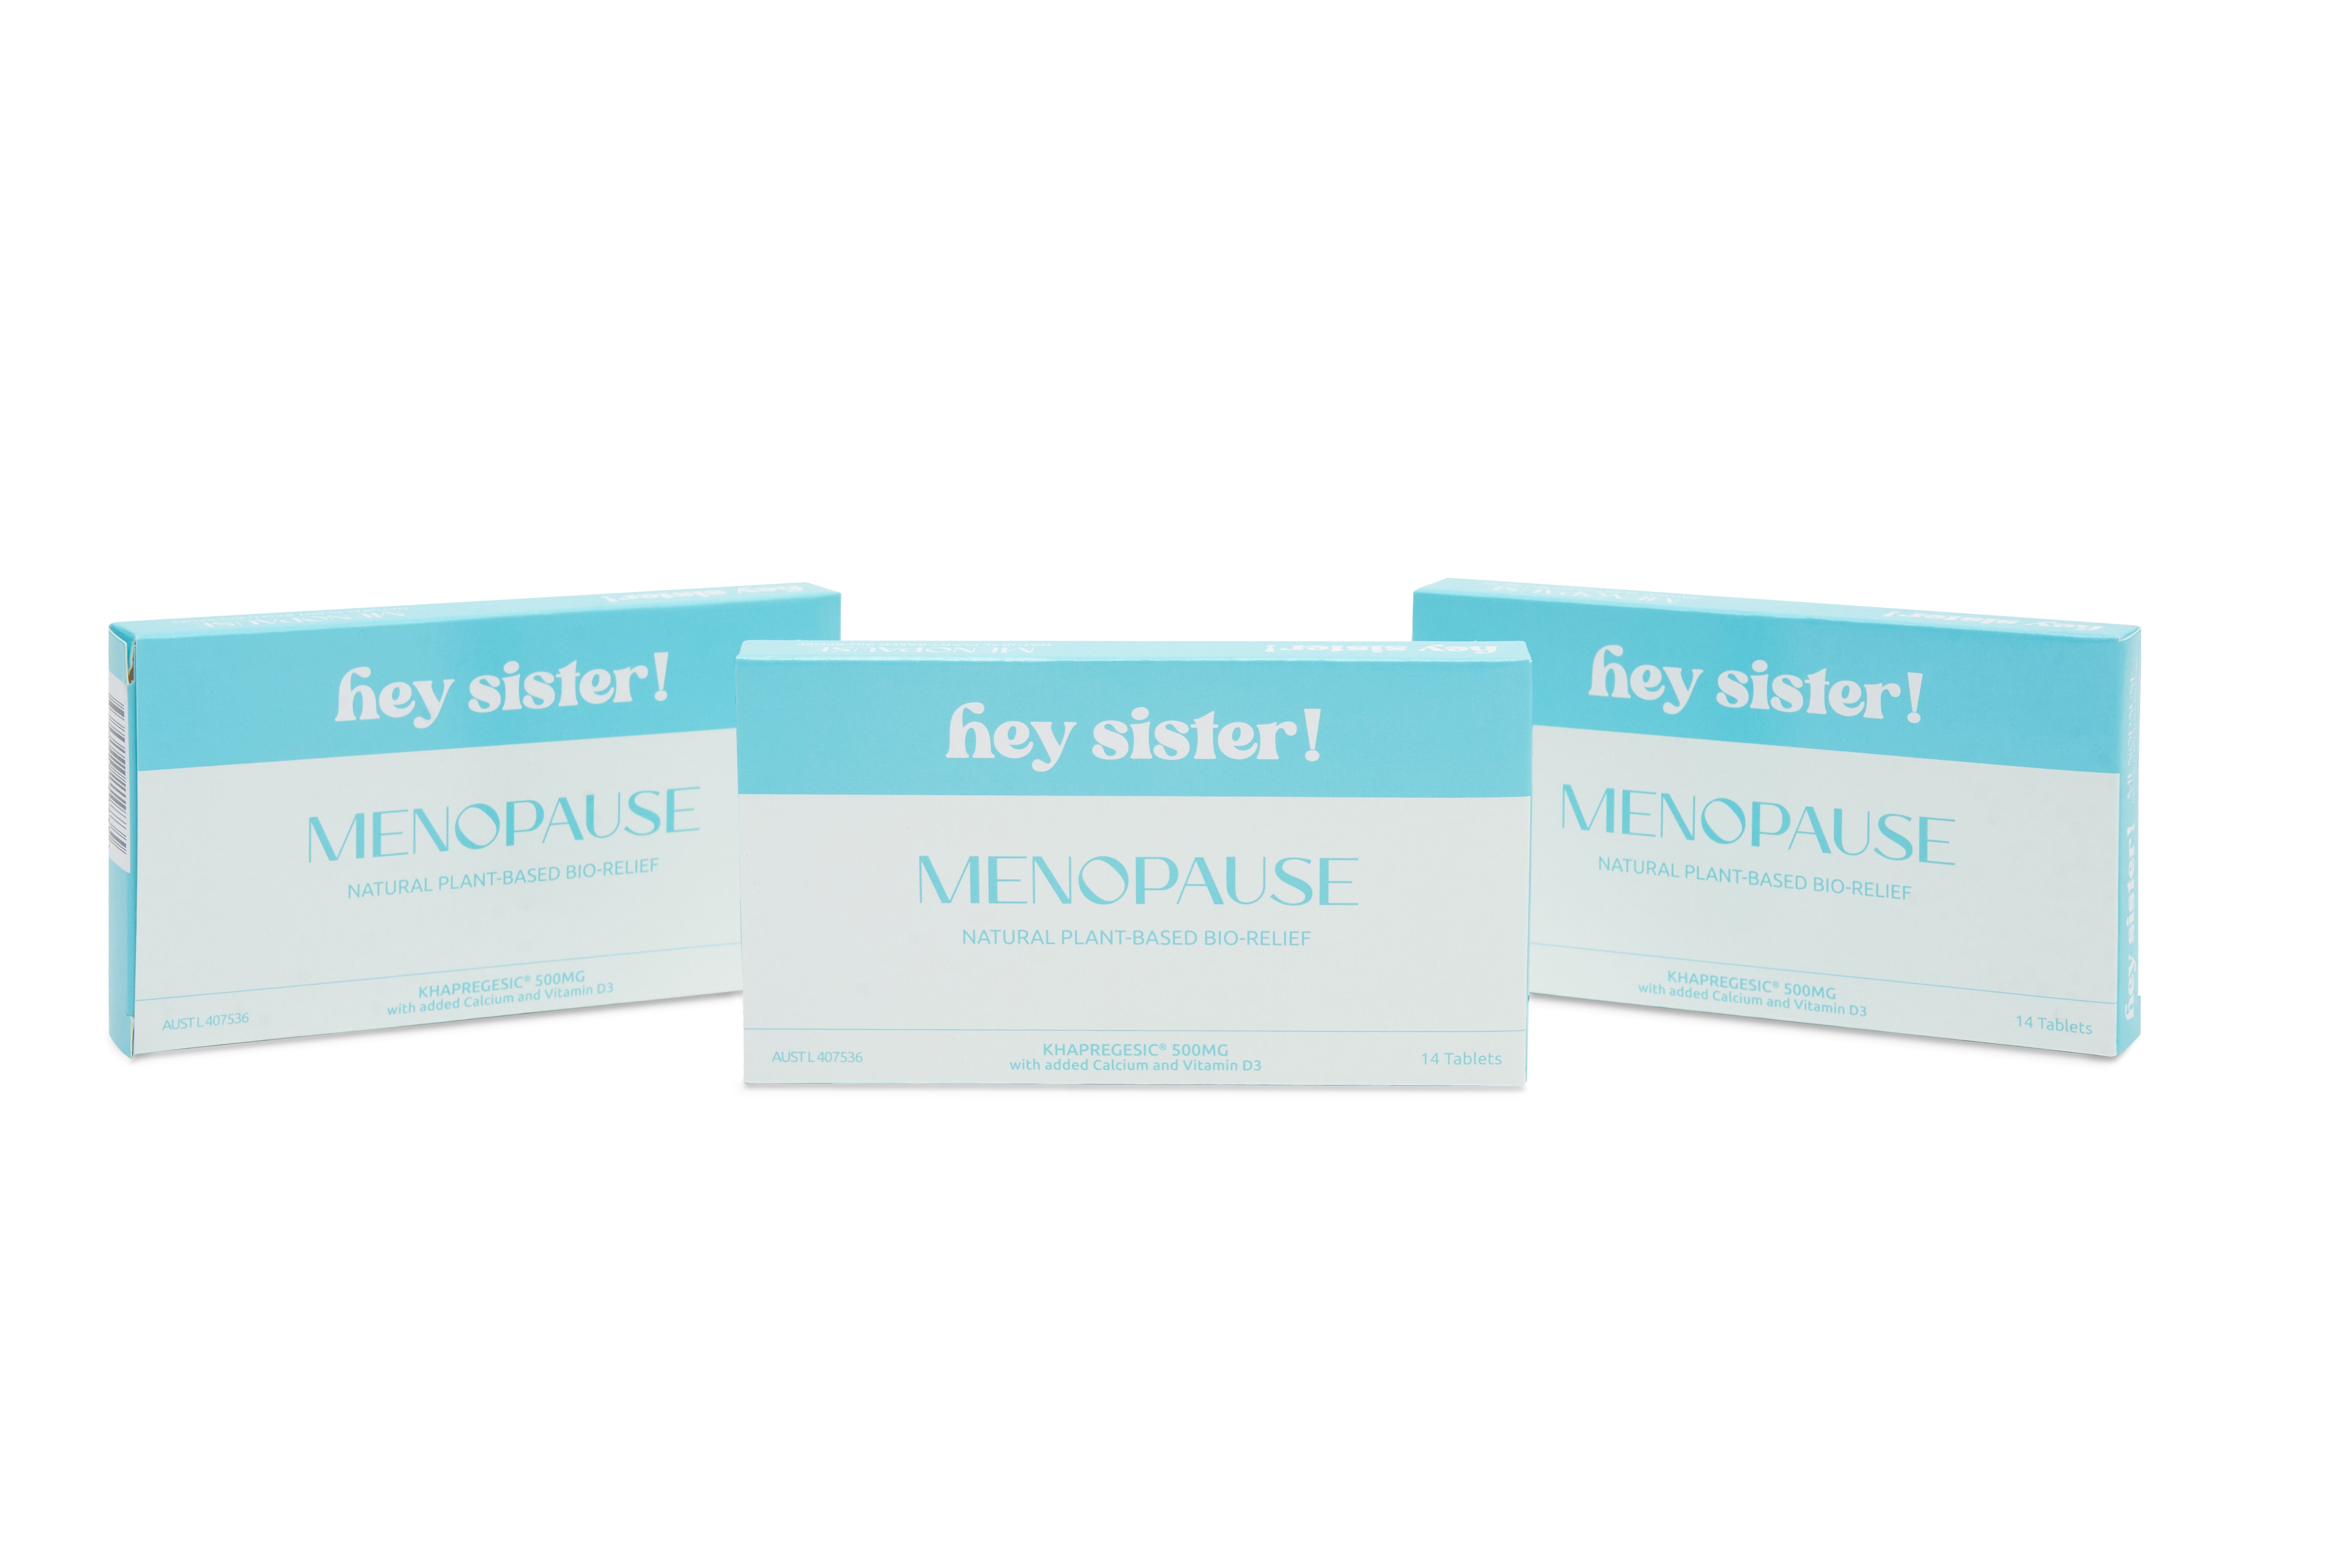 Hey Sister! Menopause - Flare Up 3 Pack